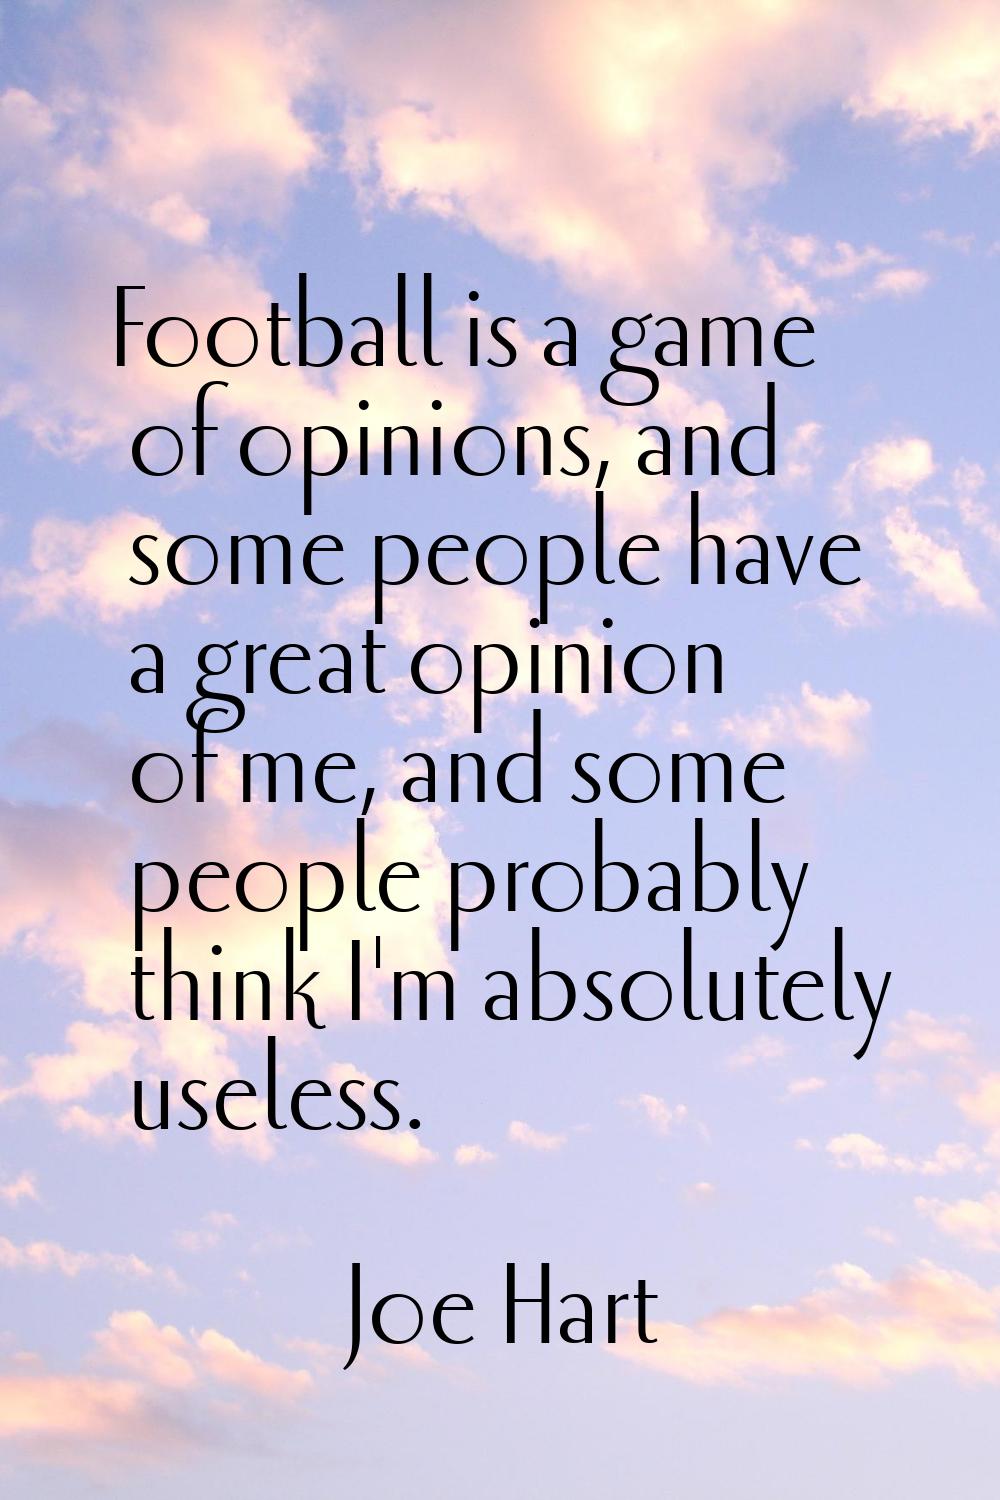 Football is a game of opinions, and some people have a great opinion of me, and some people probabl